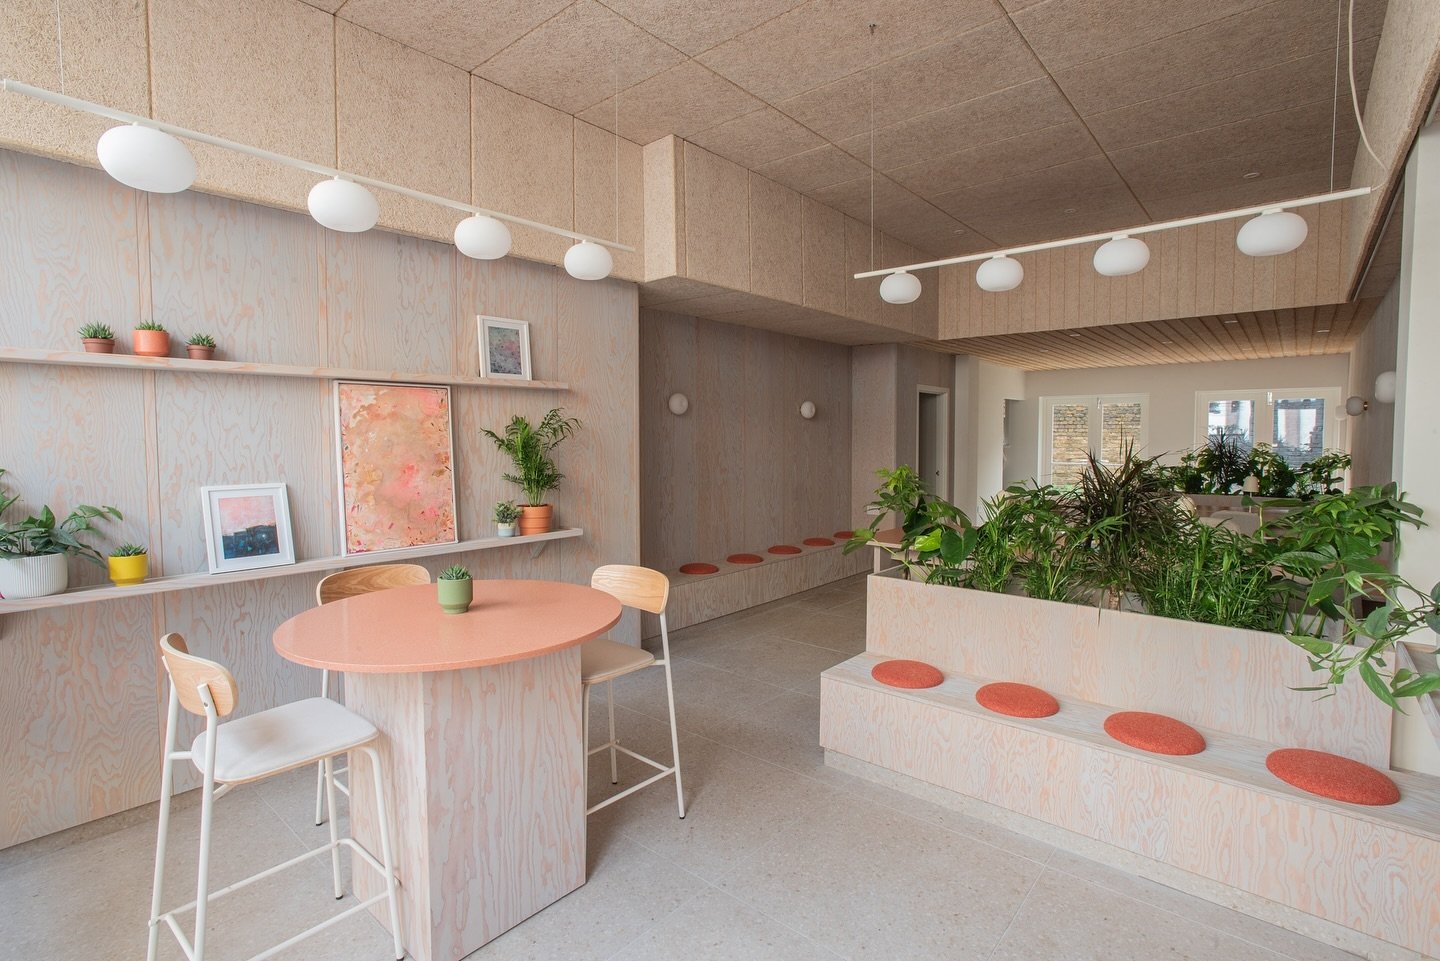 STOW BROTHERS HACKNEY OFFICE DESIGN. The @stowbrothers mission is to make the experience of buying or selling a property as smooth and stress-free as possible, so it was important that the customer meet and greet area felt relaxed. 

@gavincoylestudi